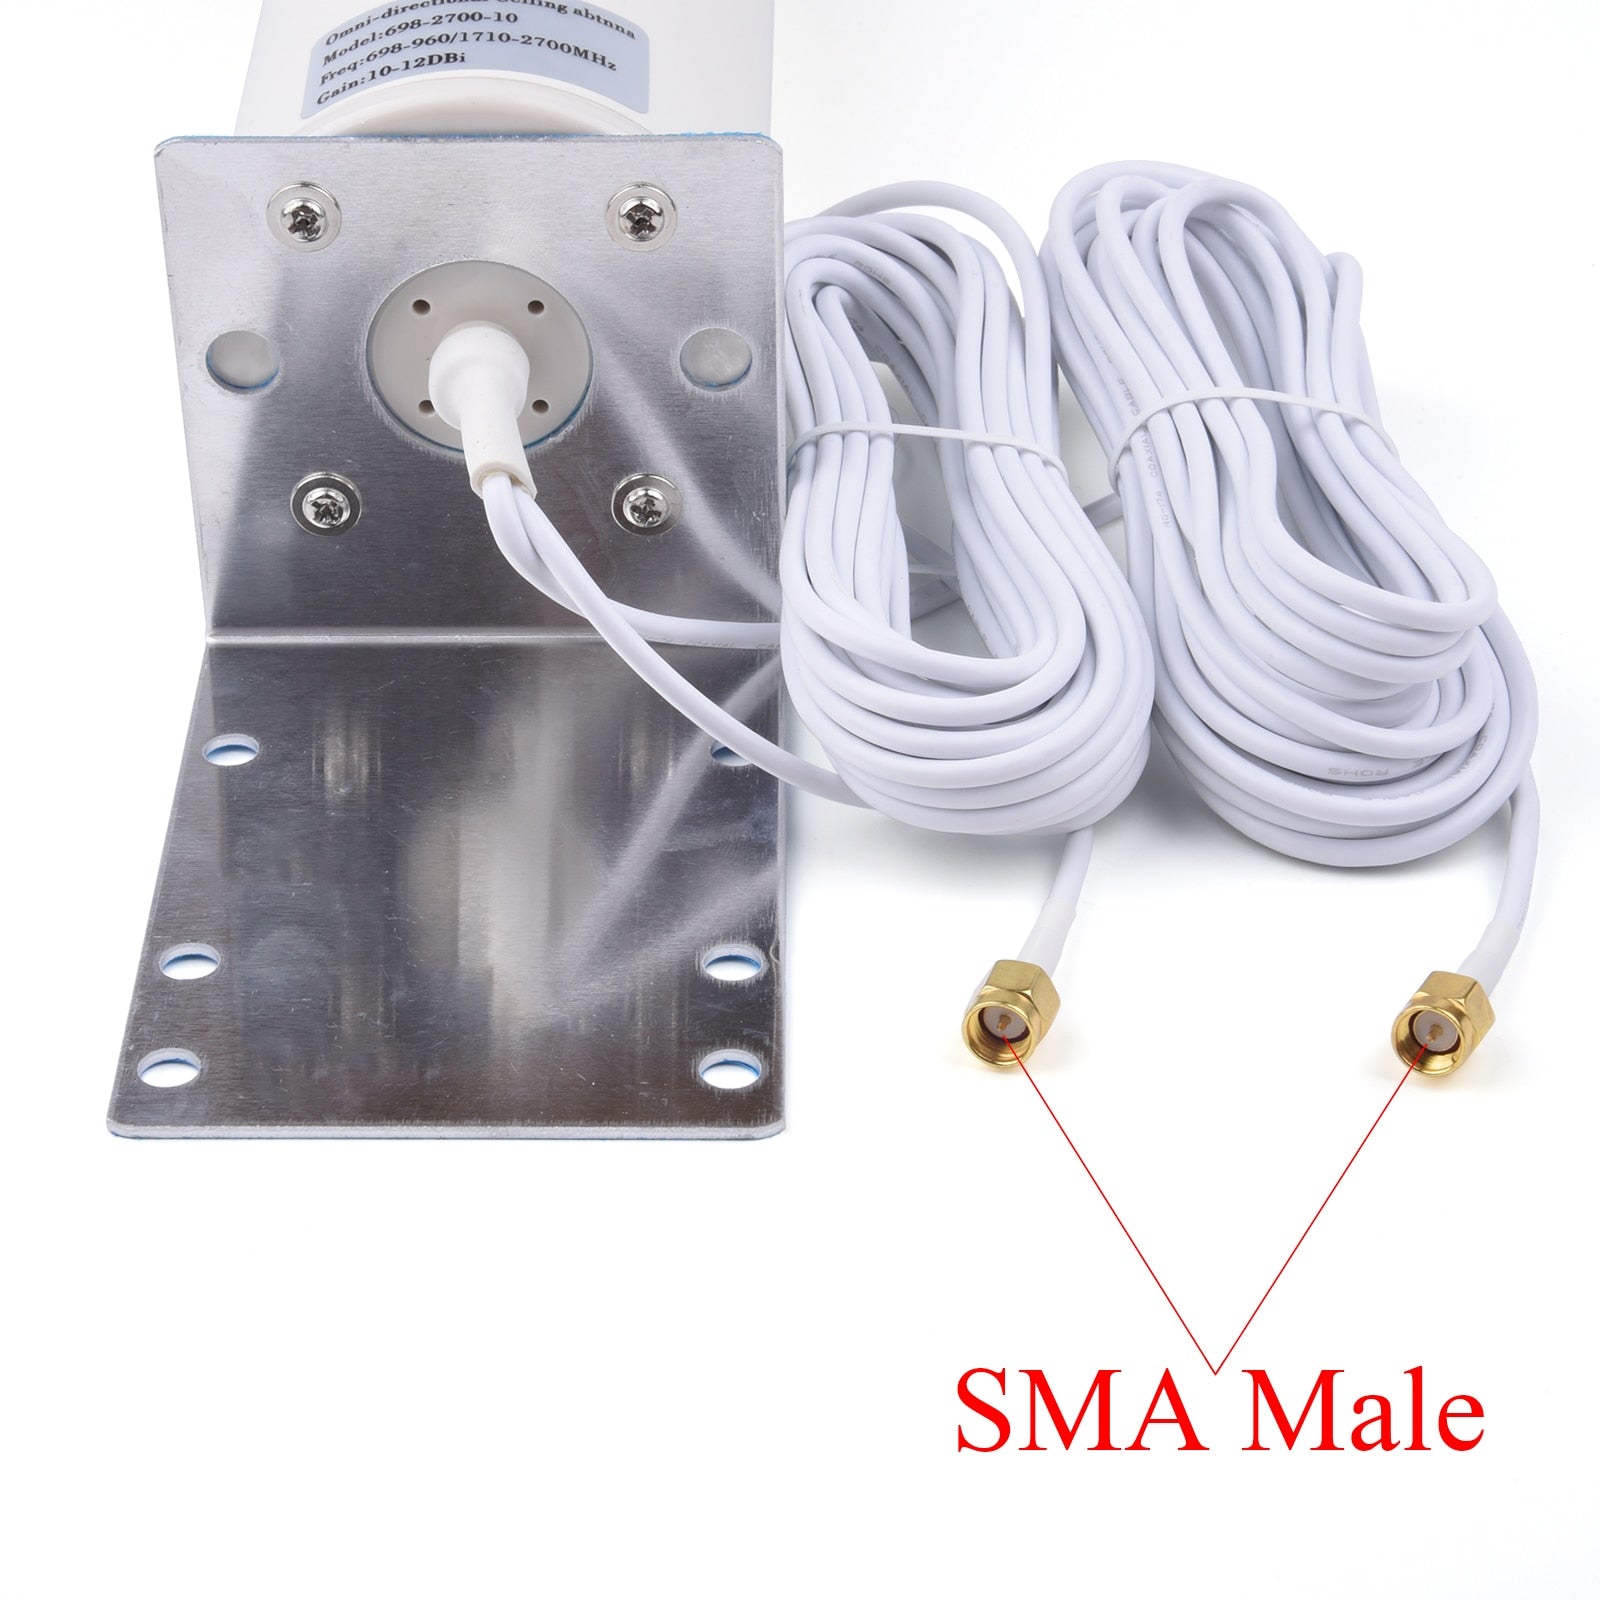 FR&RU Warehouse 10-12dBi 4G LTE Antenna 698-2700MHz 4G 3G 2G Outdoor Antenna Dual SMA Male 5m/16.4ft Cable For Modem Router